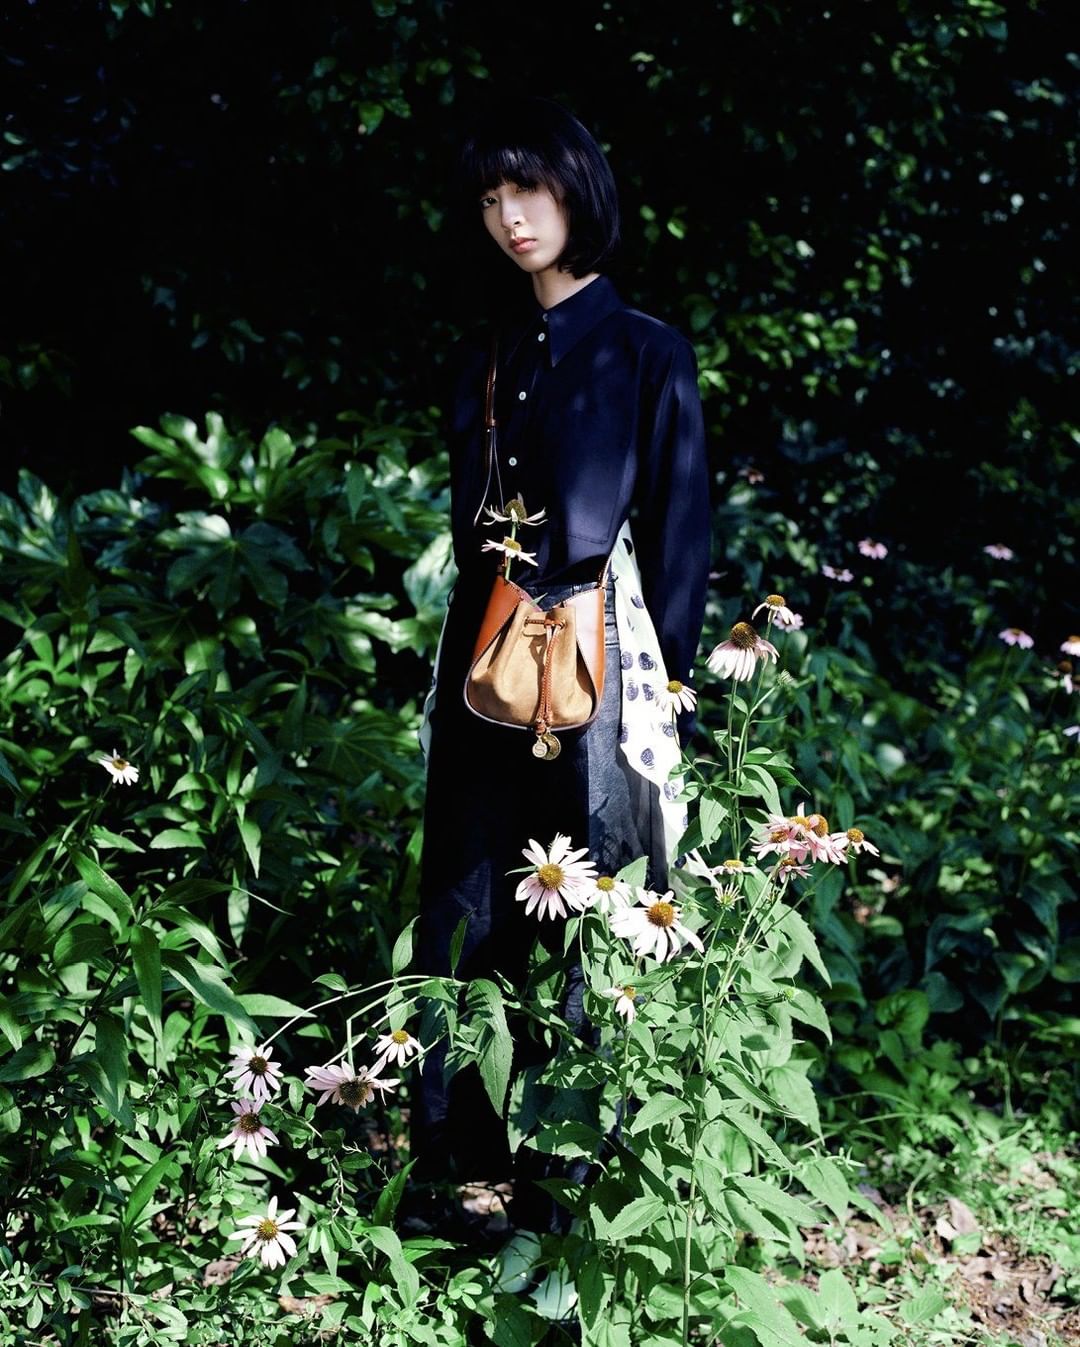 Stella McCartney - “Making conscious choices and knowing where your fashion comes from is being responsible.” – Jingyi Qian⁣
⁣
A hint of fruit print teases eccentricity against Autumn 2020’s foundatio...